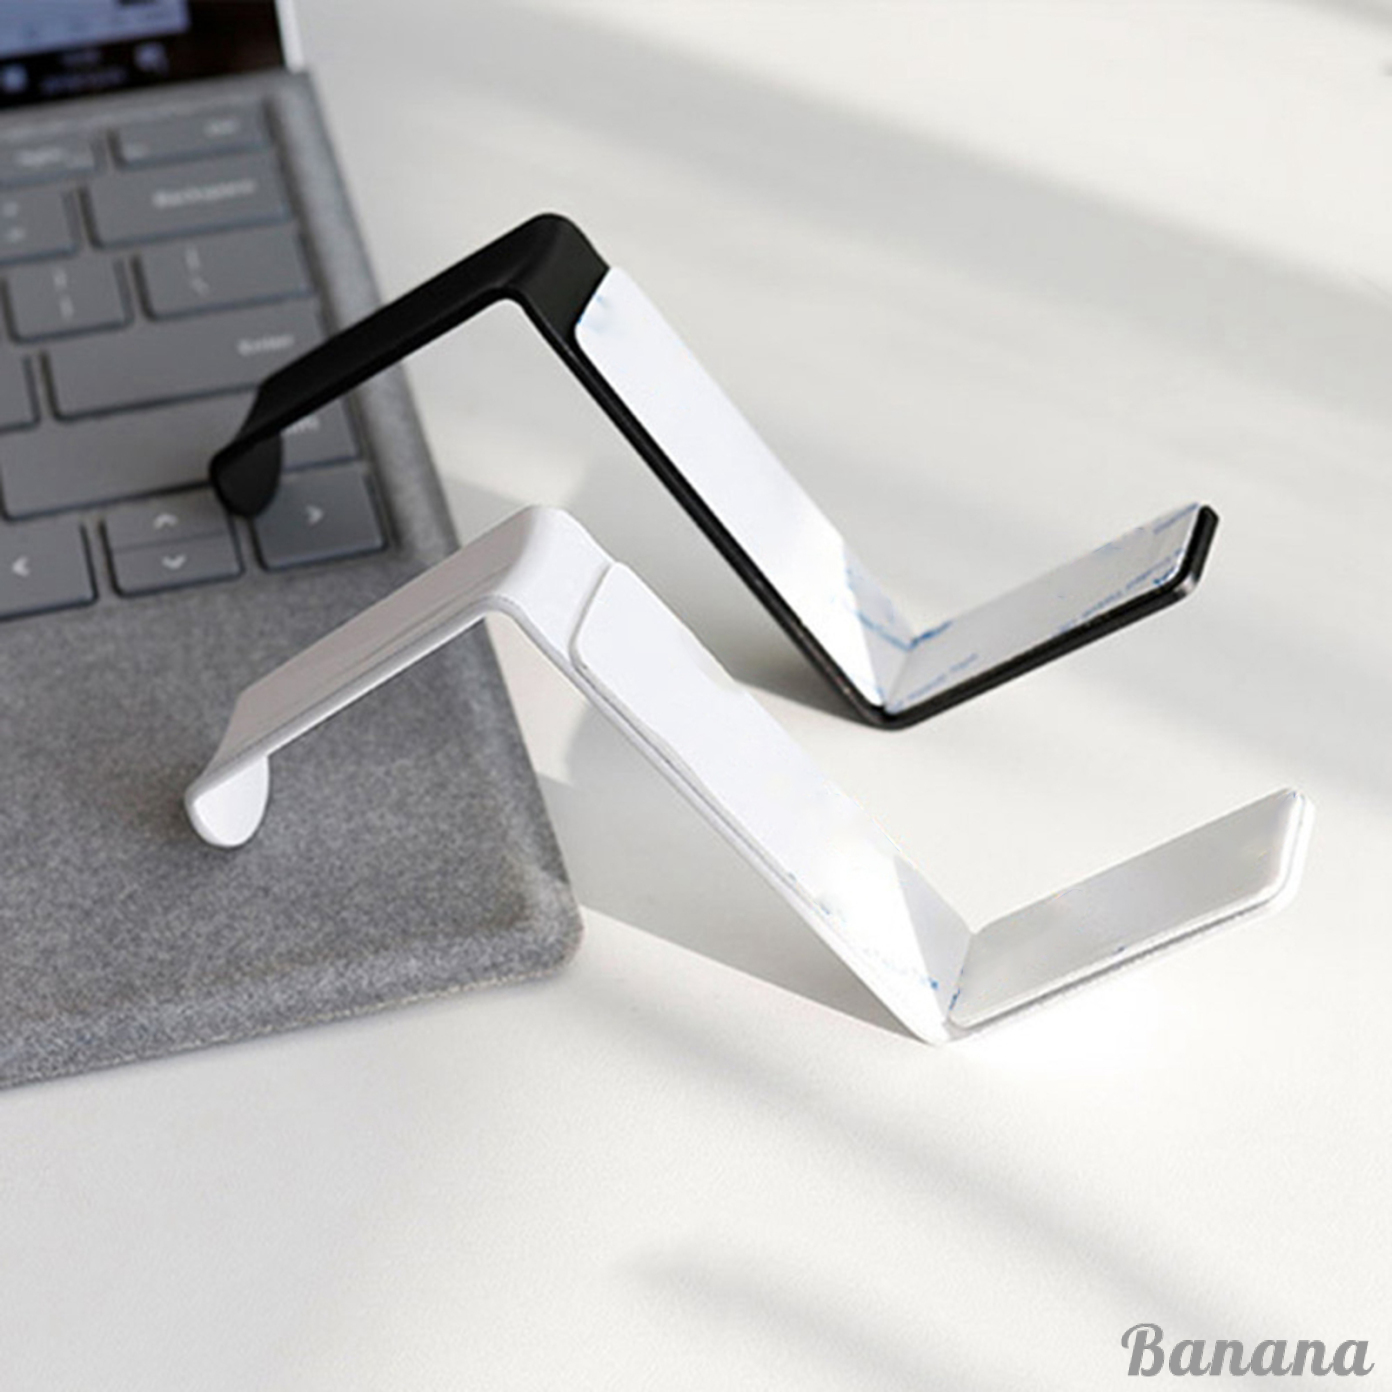 1pc Desktop Headphone Stand Clamp Hook Organizer Space Saving for Scratching Prevention